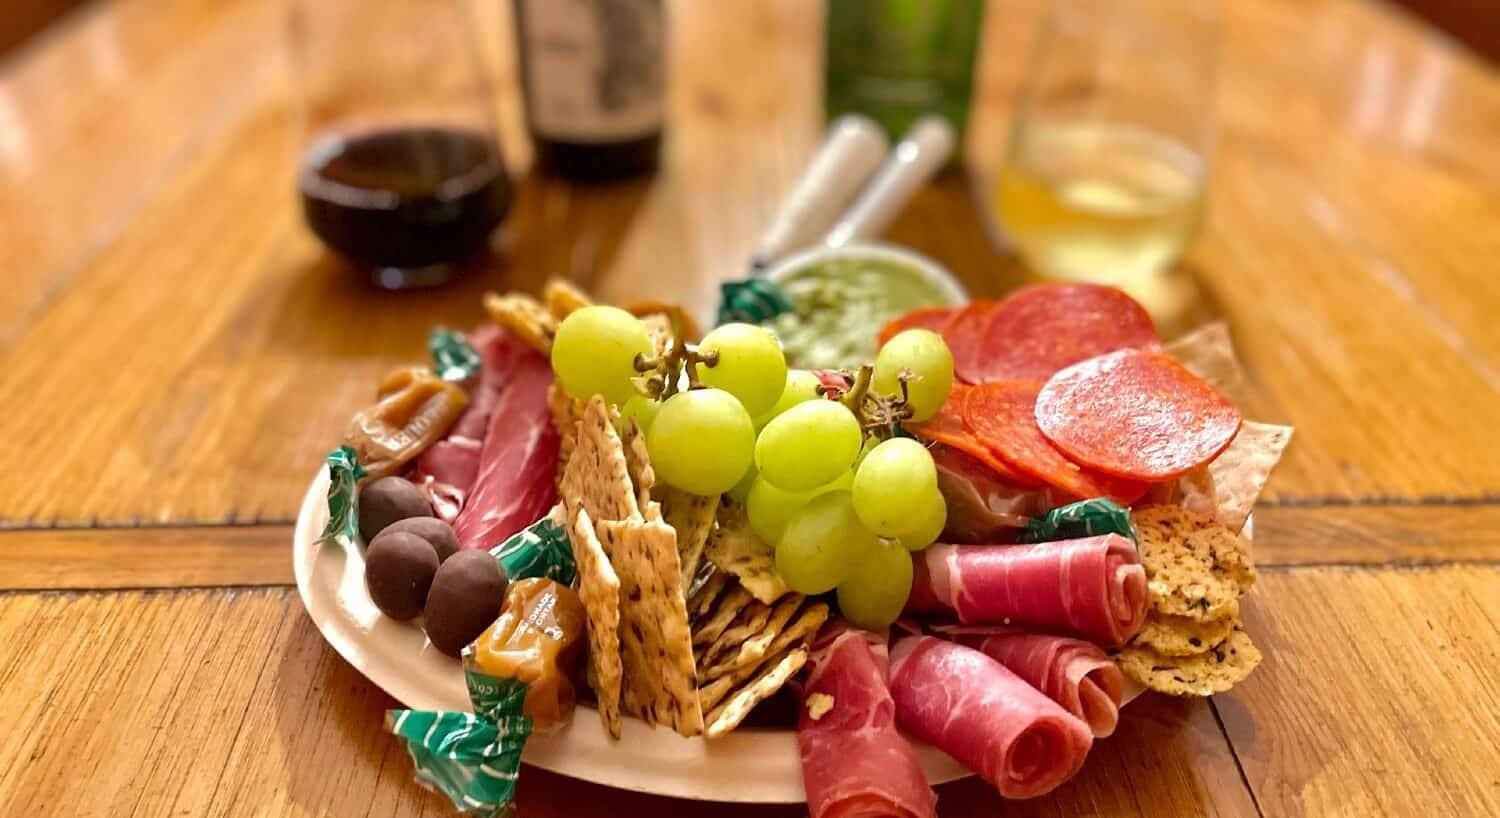 Charcuterie platter with fruit, meats, crackers and chocolates with two glasses of wine